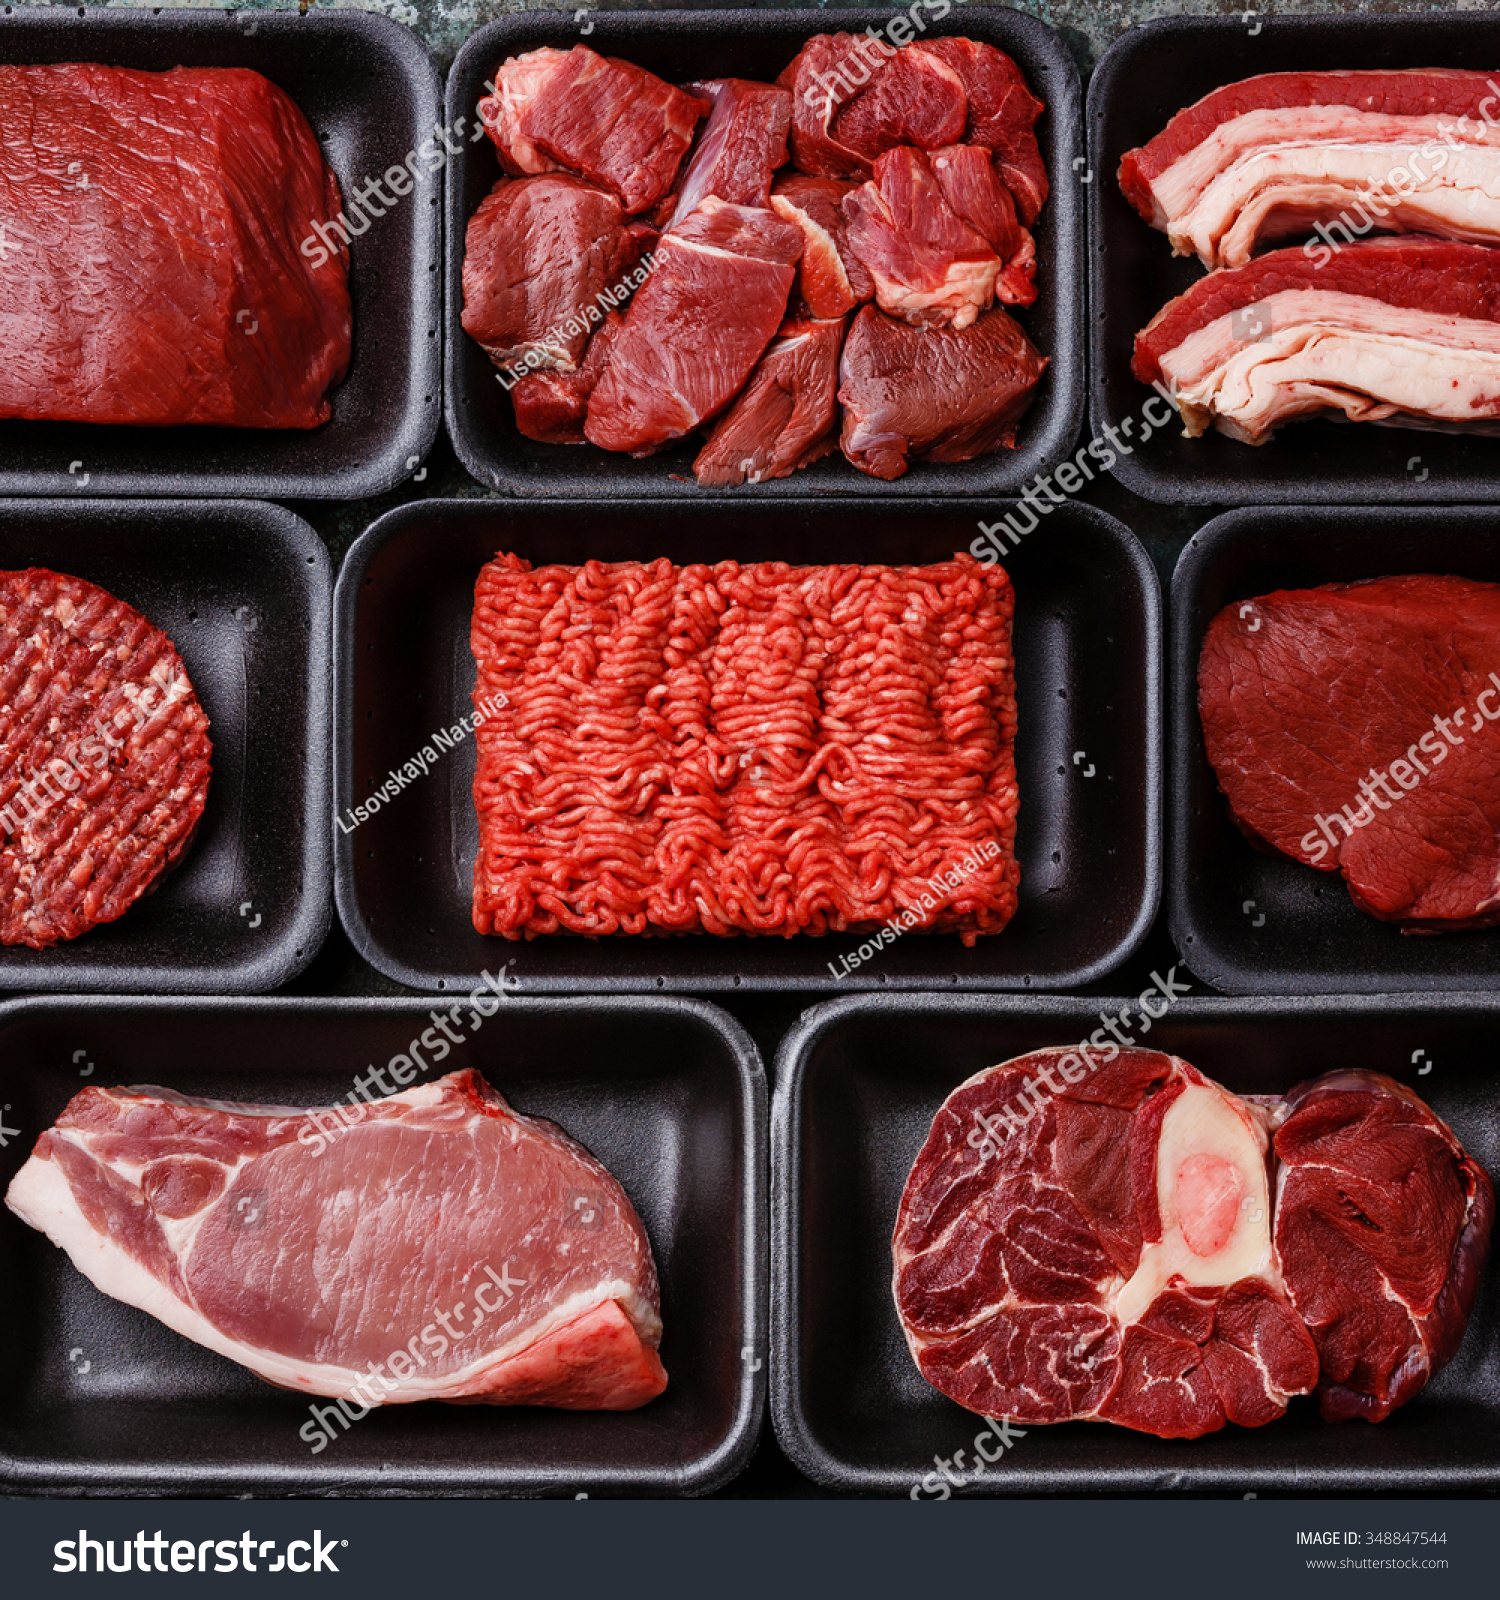 Different types of meat in plastic boxes packaging tray #348847544